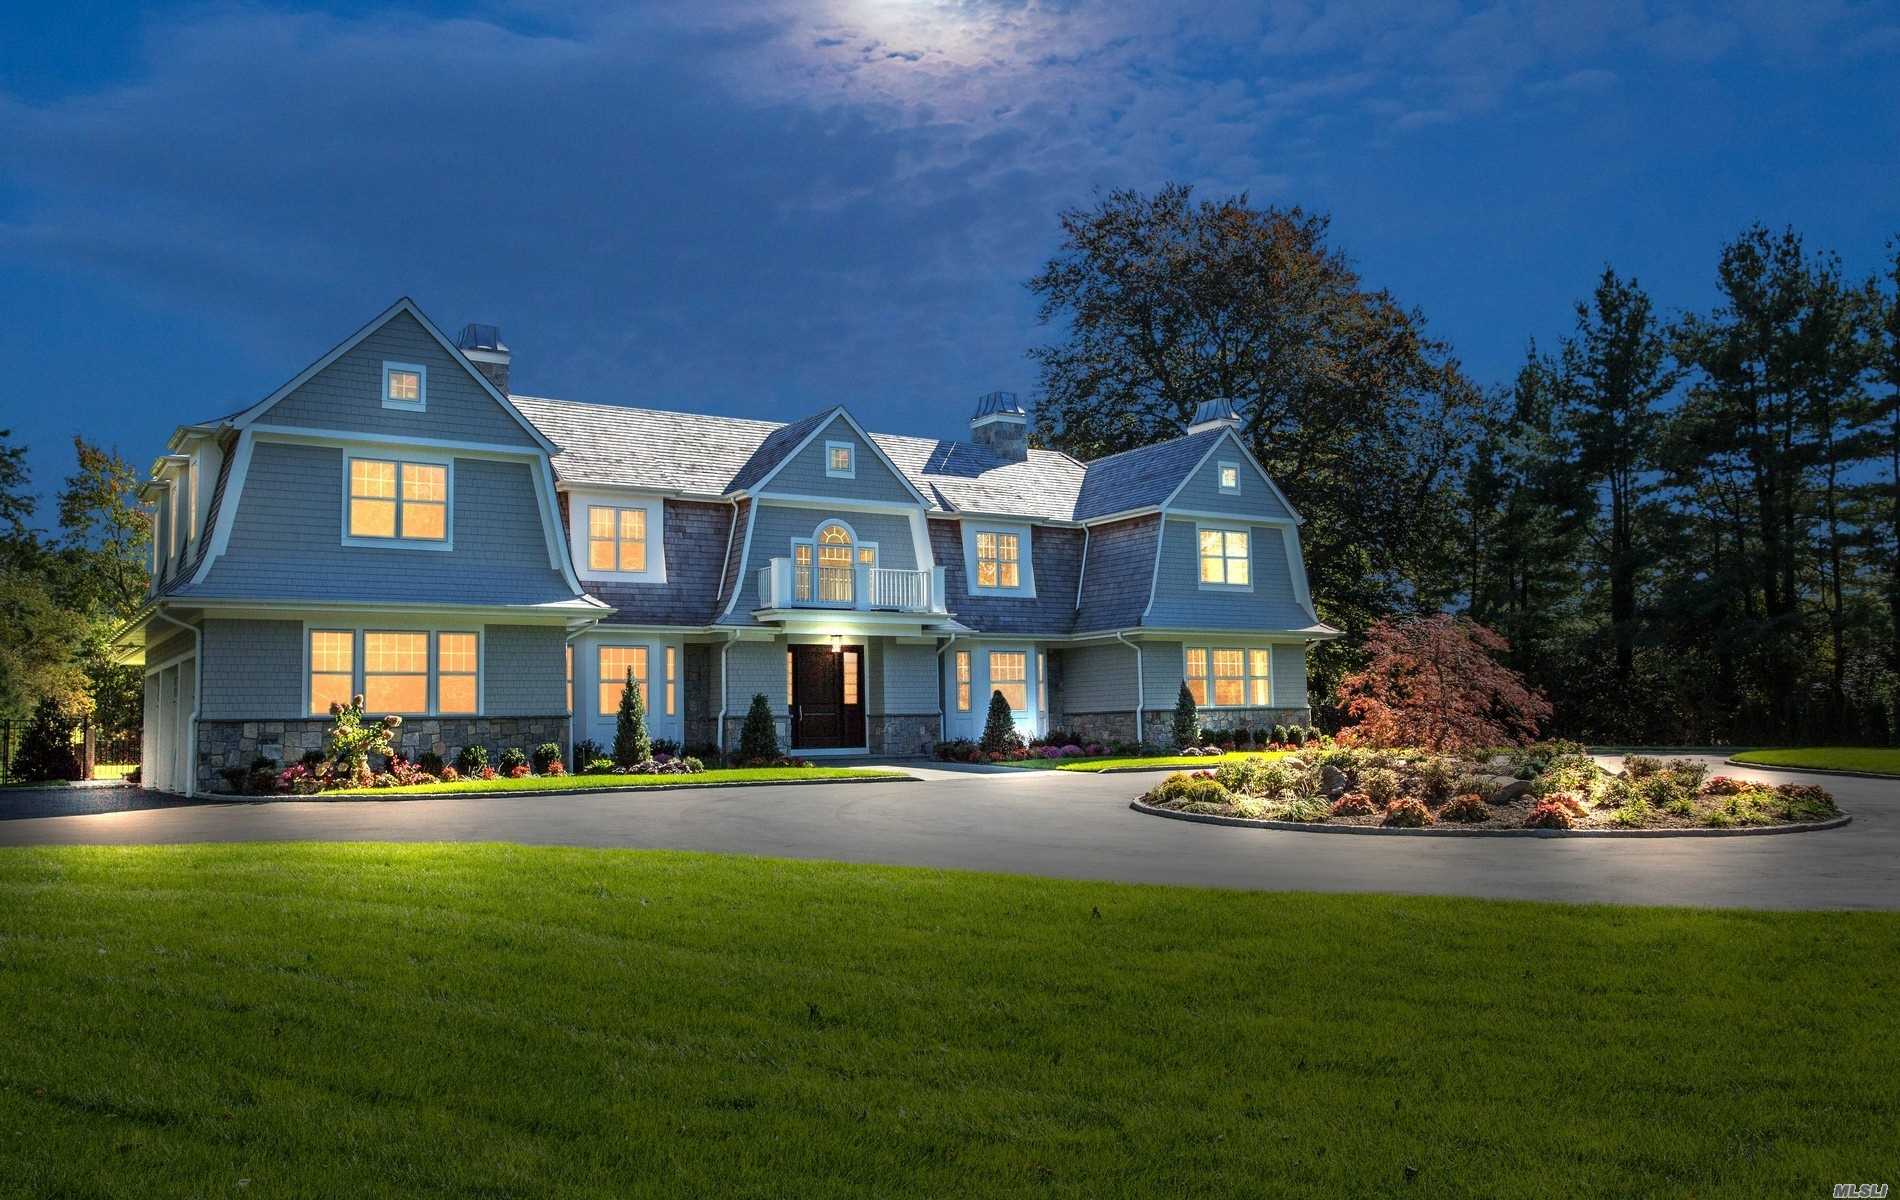 Unparalleled 6, 600 Sq.Ft New Construction.In The Prestigious Vill Of Old Westbury.Cedar & Stone Hampton Style Col Built By Noted Gold Coast Builder.2 Mag.Flat, Prof Landscaped Acres W/In Ground Heated Pool.Transitional & Chic W/The Finest Materials, Designer Trim & Moldings, Formal Dr W/Coffered Ceilings.20Ft.Grand Entry Foyer, Chef&rsquo;s Gourmet Kitchen W/Commercial Grade Appliances, Master Suite W/Fpl, Sitting Rm, W-In Built In Closet & Radiant Heated Spa Bath East Williston (Wheatley) School District.